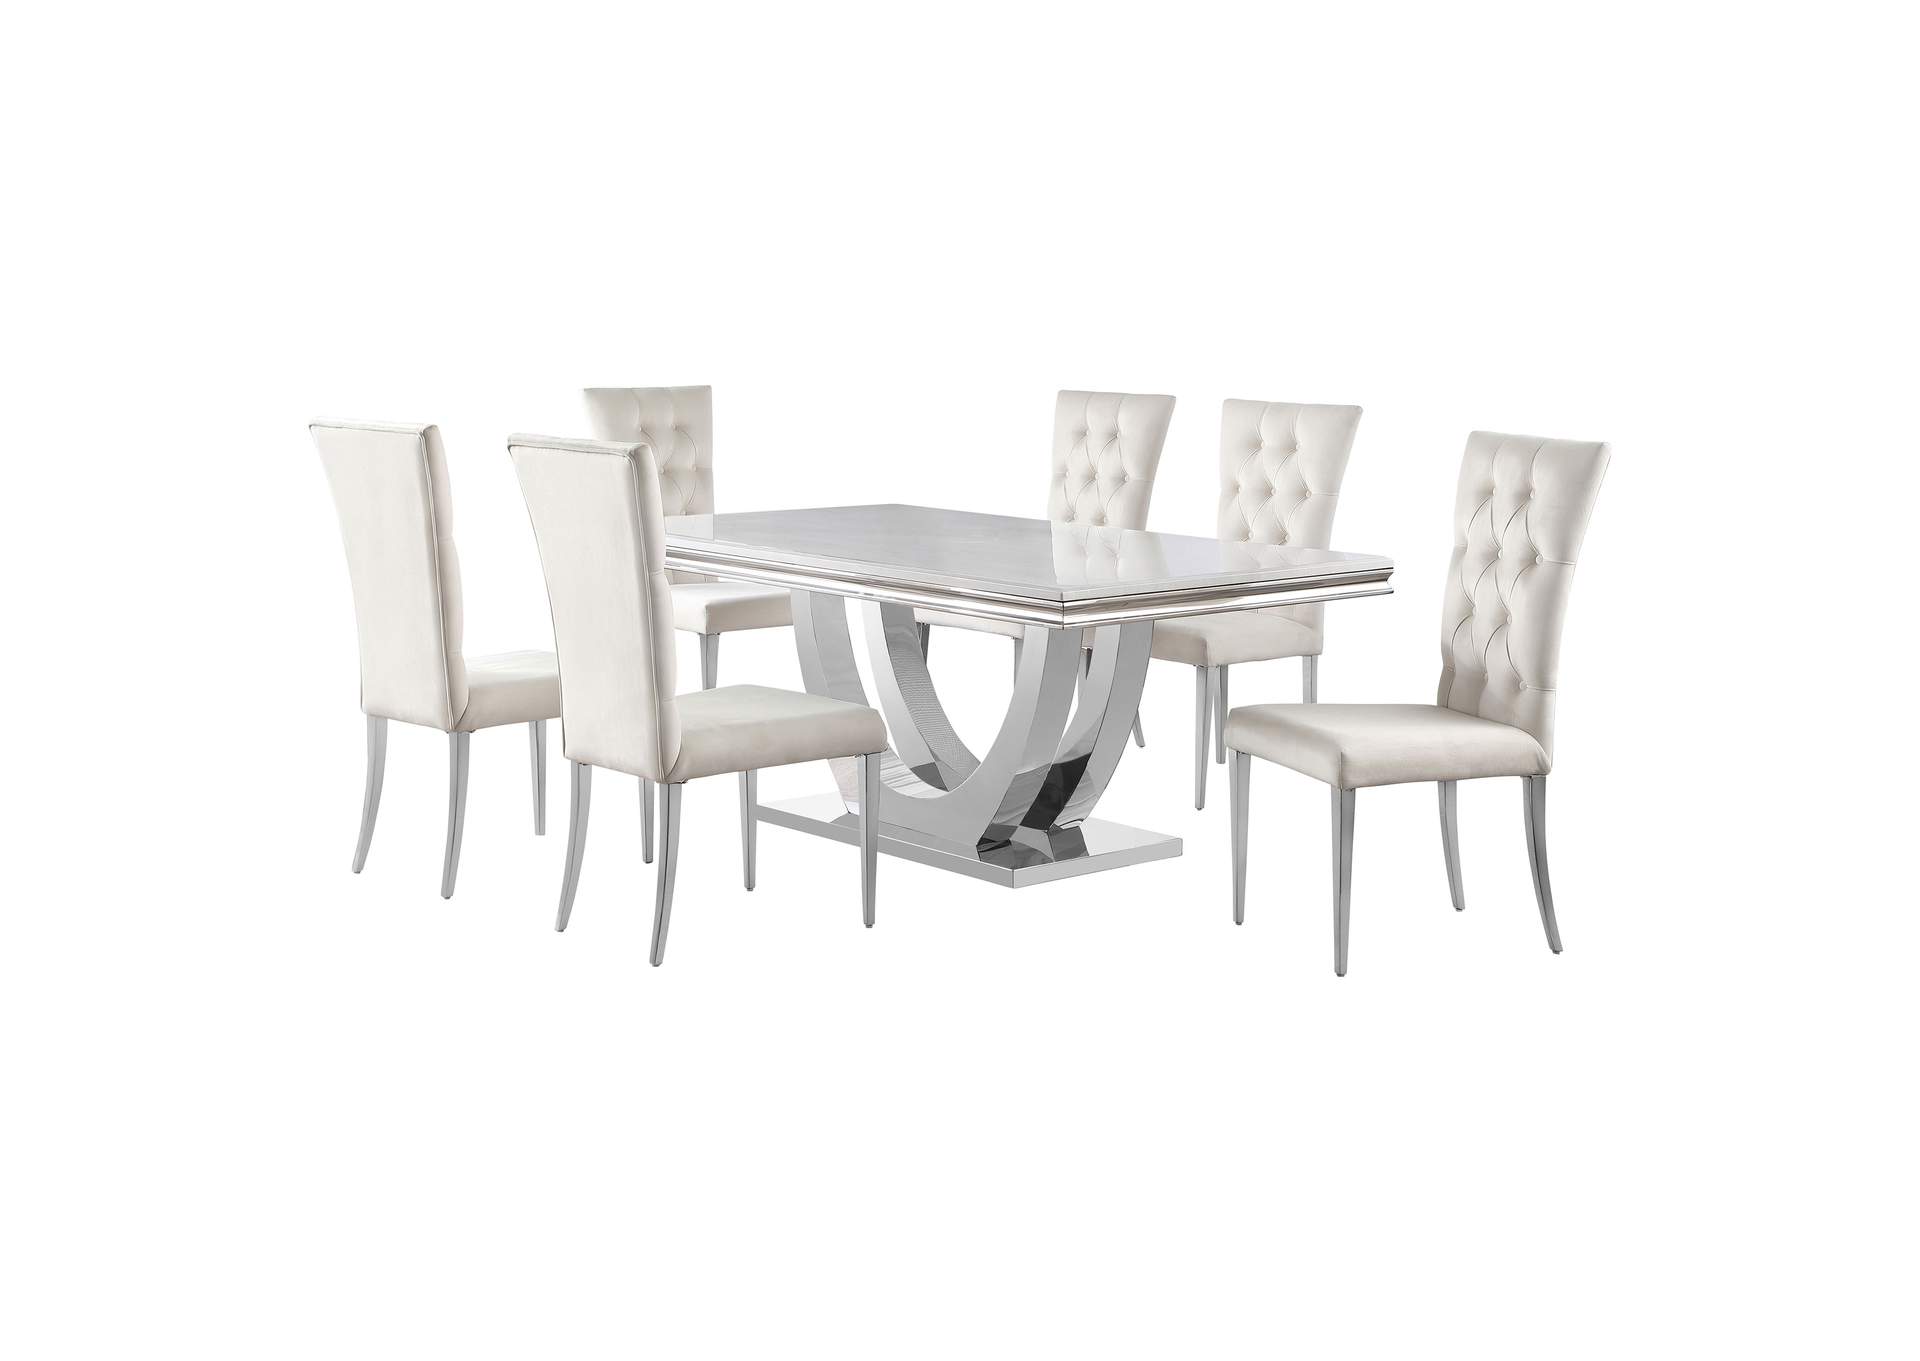 Kerwin 7-piece Dining Room Set White and Chrome,Coaster Furniture